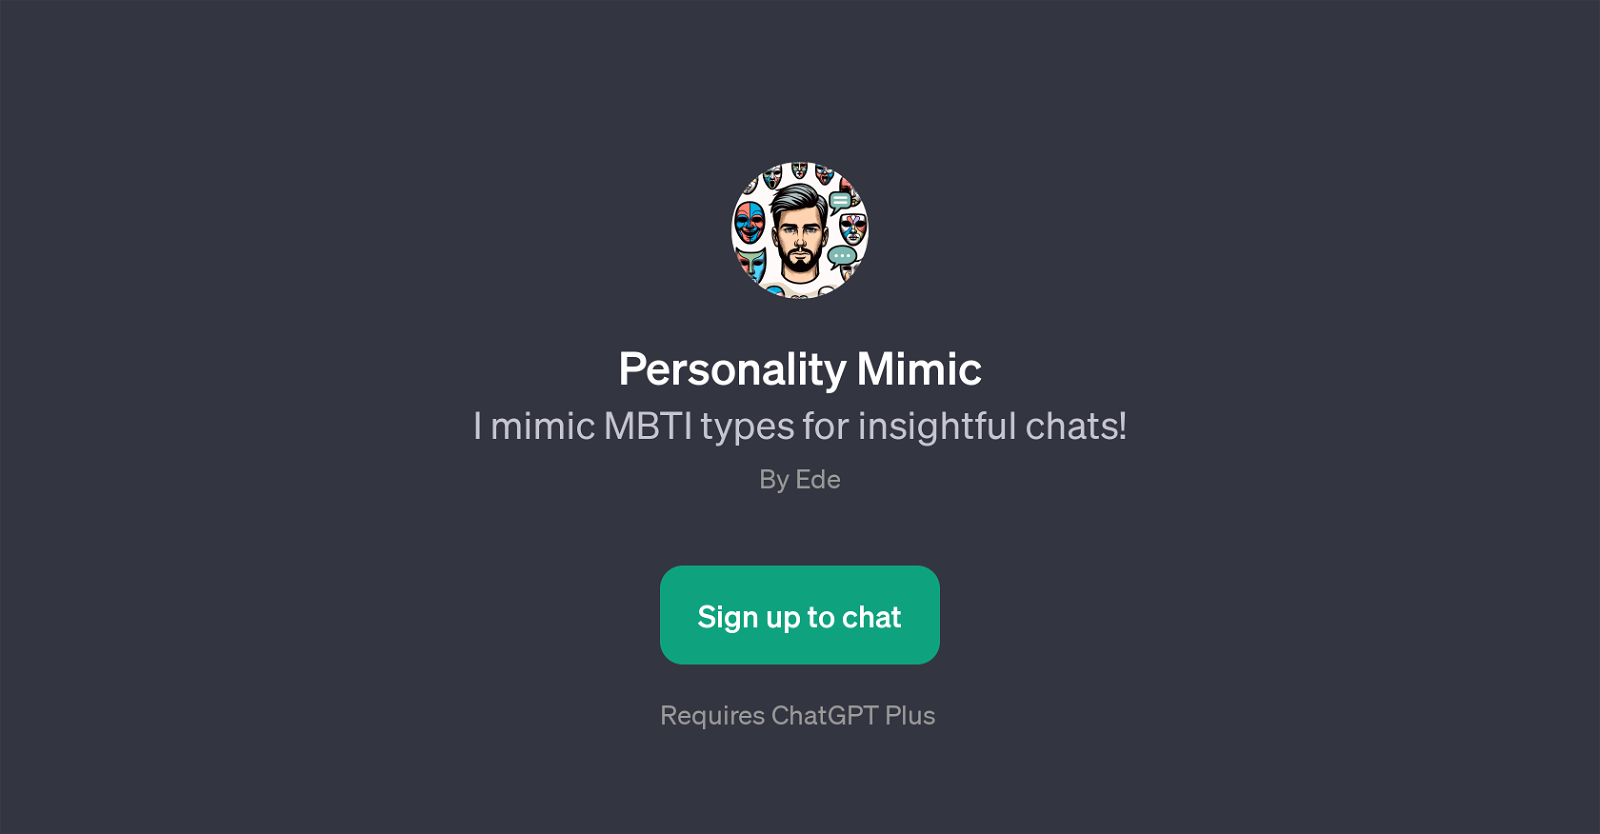 Personality Mimic website